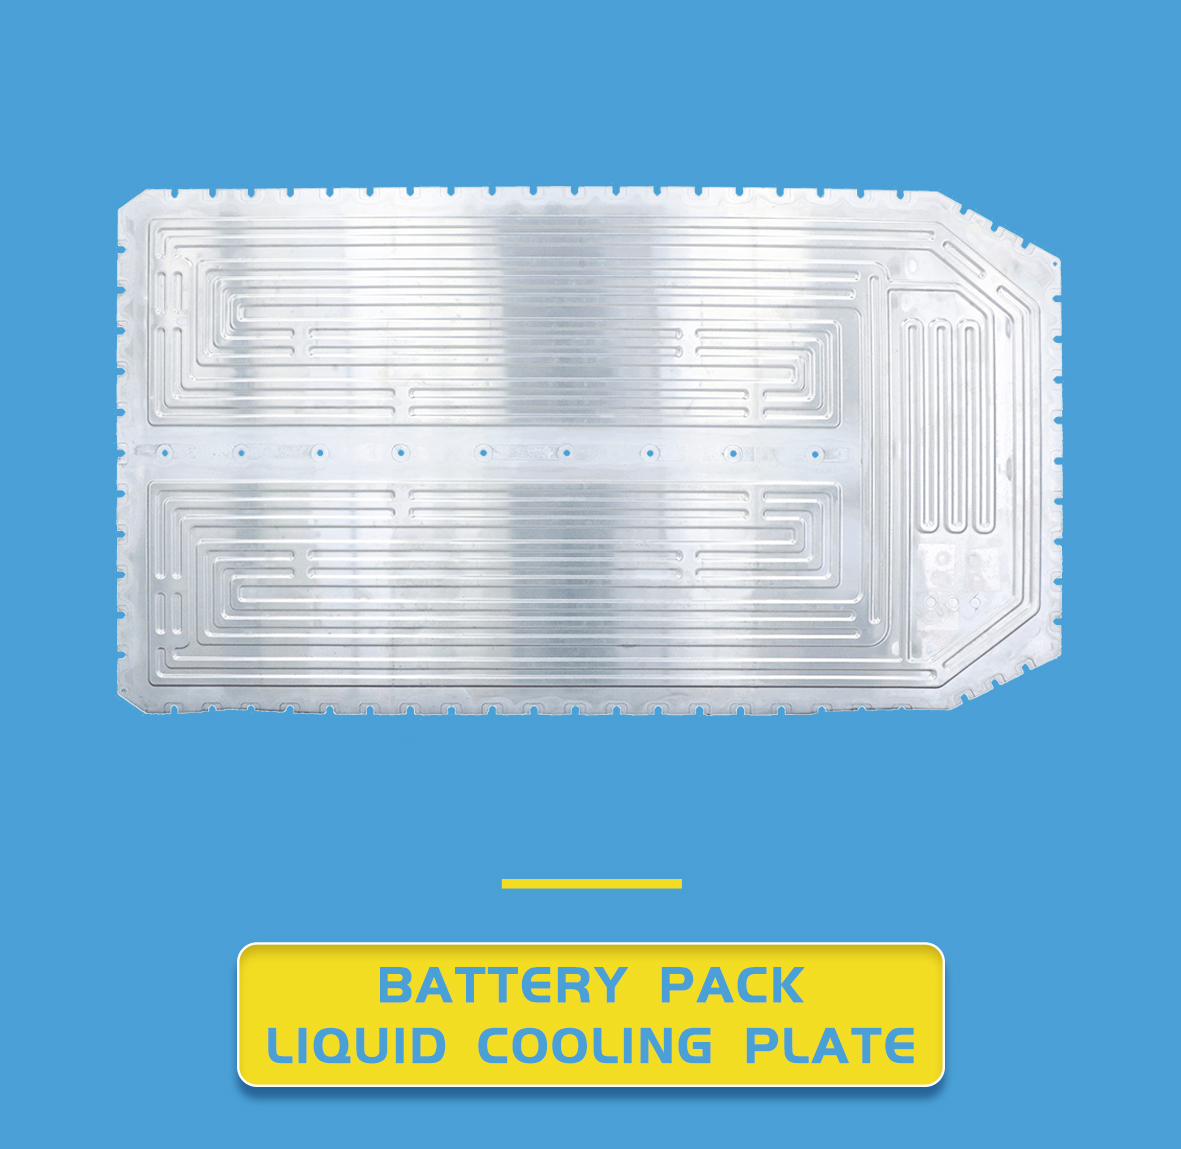 BATTERY PACKIQUID COOLING PLATE 5